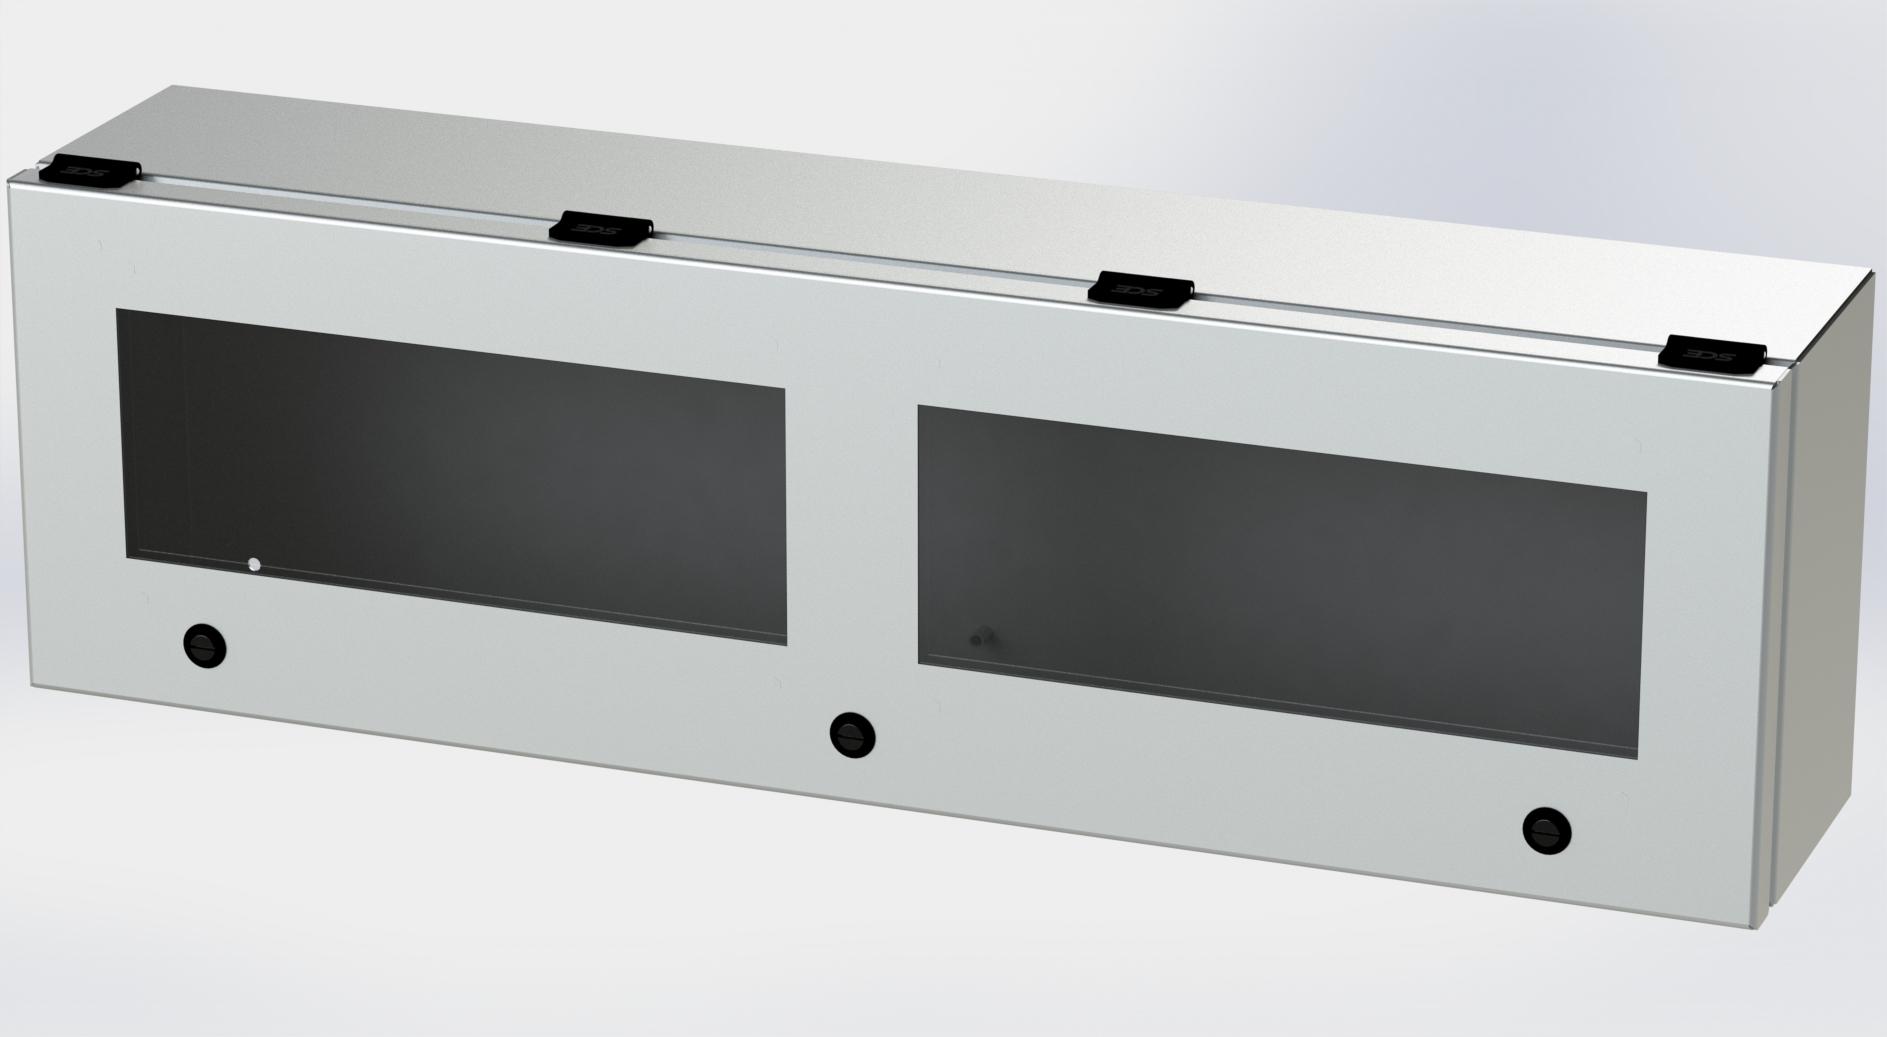 Saginaw Control SCE-L9306ELJWSS S.S. ELJ Trough Window Enclosure, Height:9.00", Width:30.00", Depth:6.00", #4 brushed finish on all exterior surfaces. Optional sub-panels are powder coated white.